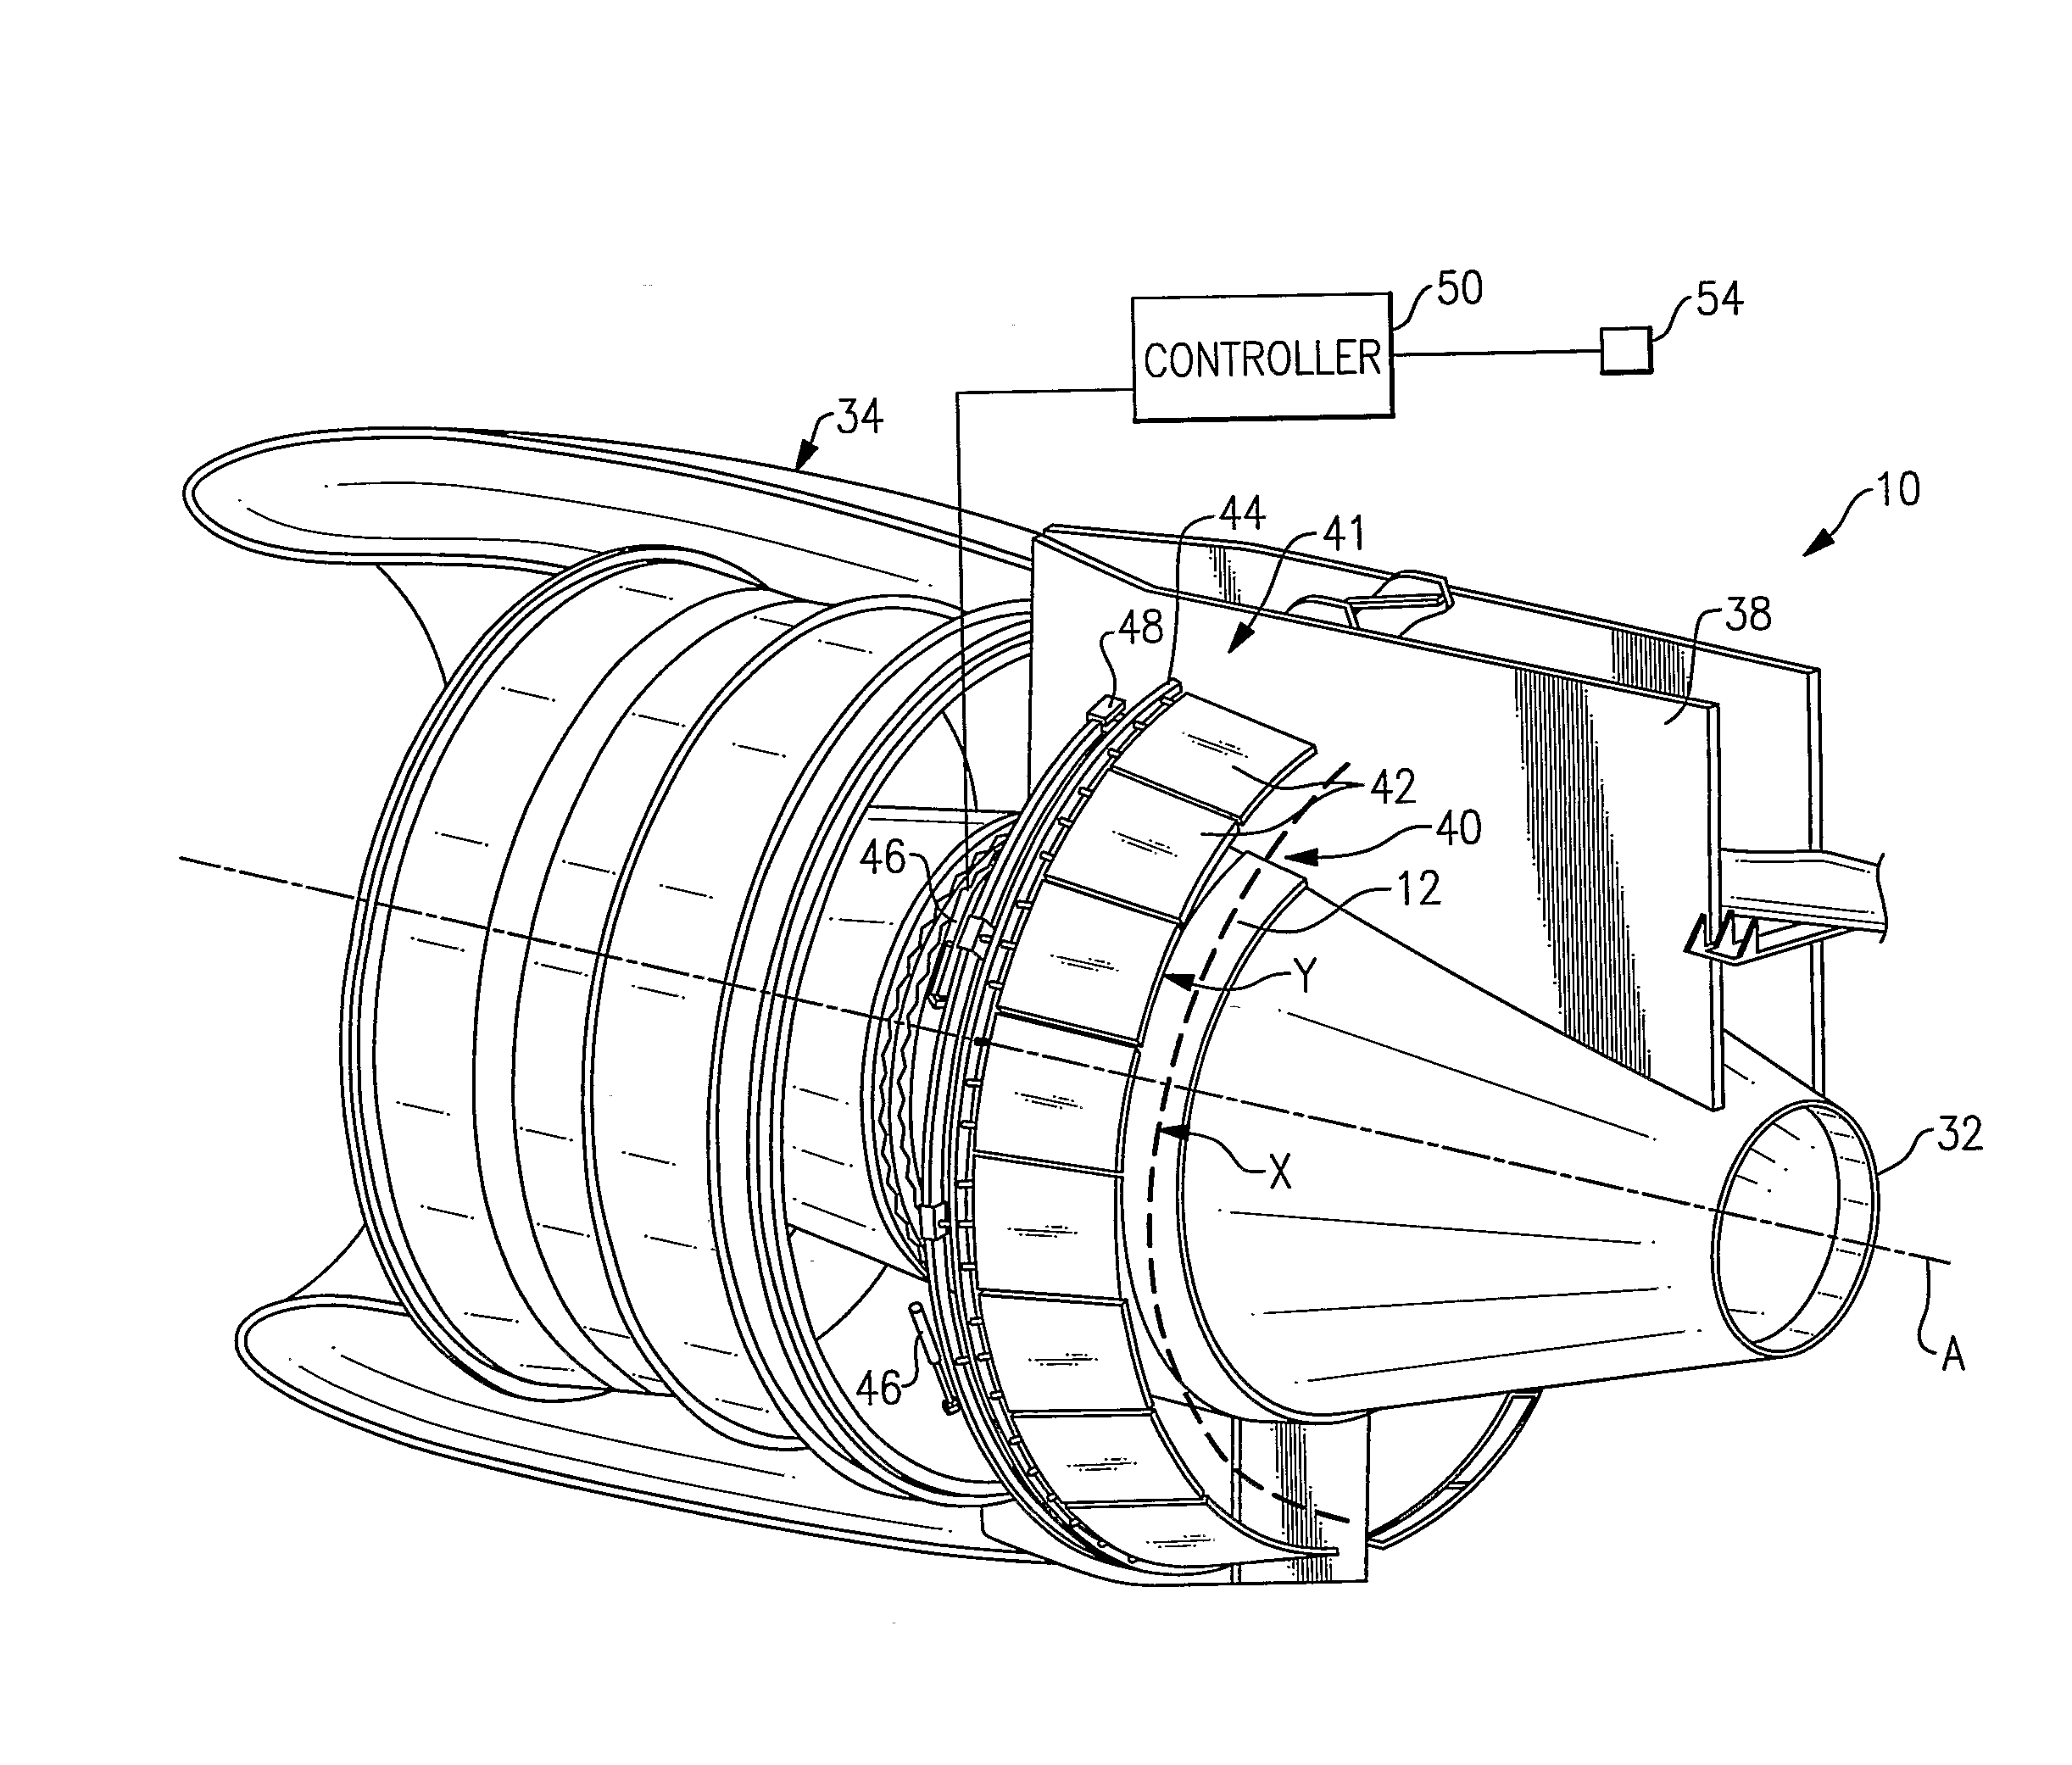 Turbofan engine with variable area fan nozzle and low spool generator for emergency power generation and method for providing emergency power